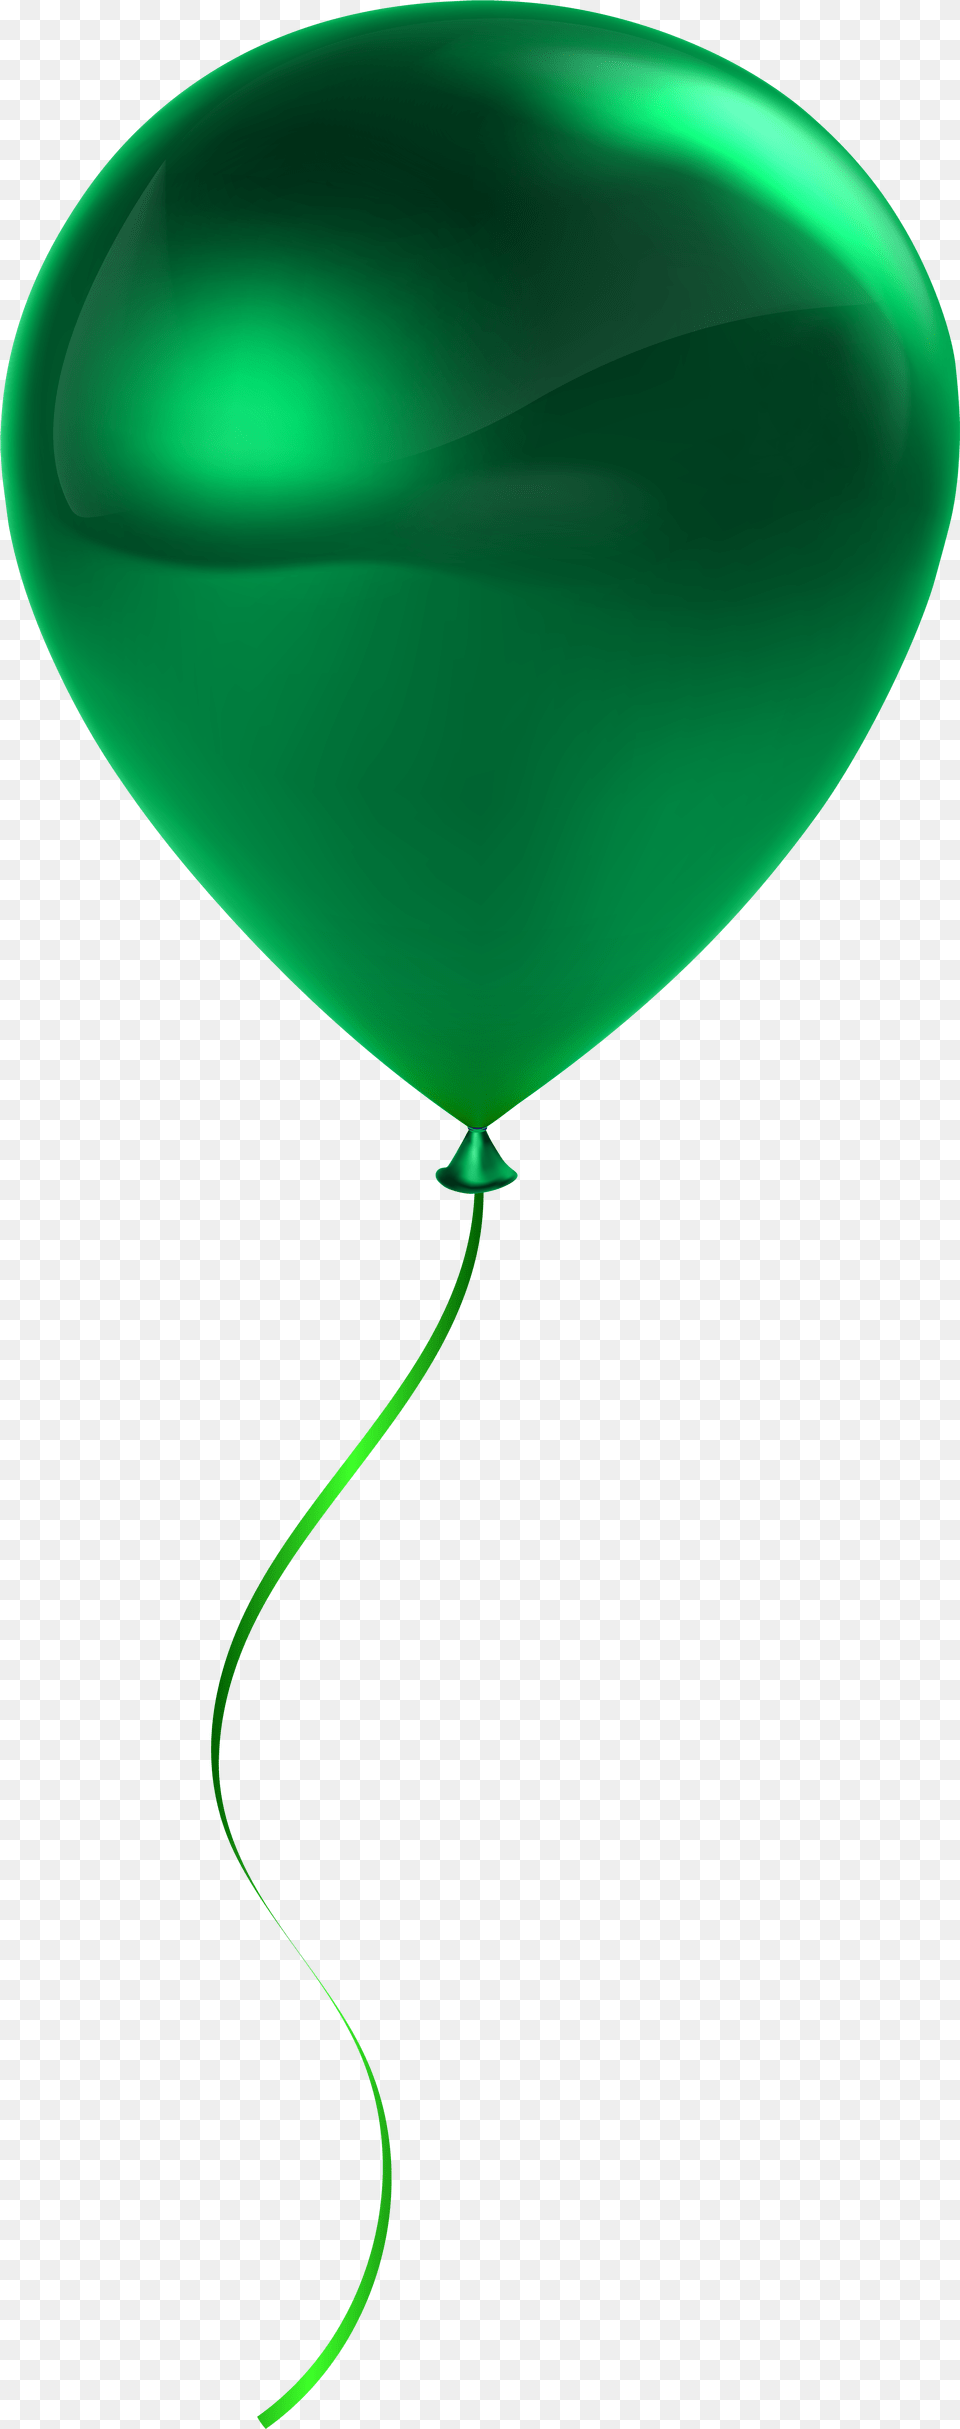 Balloons Clipart Transparent Background Green Balloon In, Accessories, Gemstone, Jewelry Png